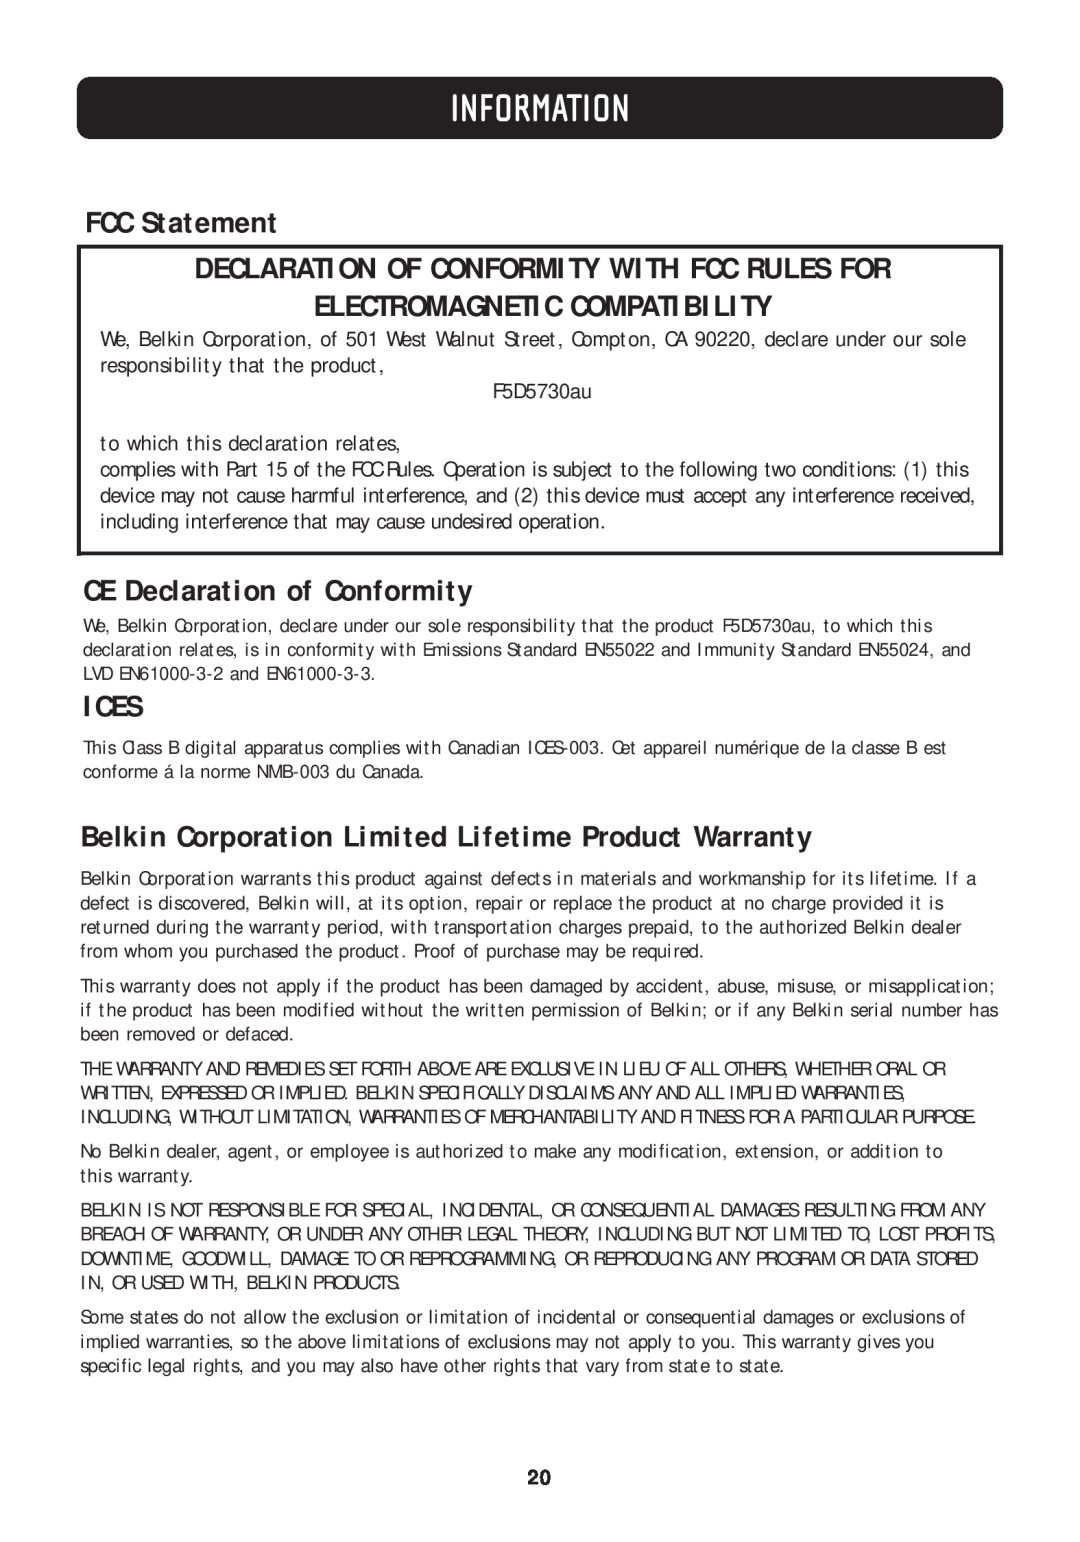 Belkin F5D5730au Information, FCC Statement DECLARATION OF CONFORMITY WITH FCC RULES FOR, Electromagnetic Compatibility 